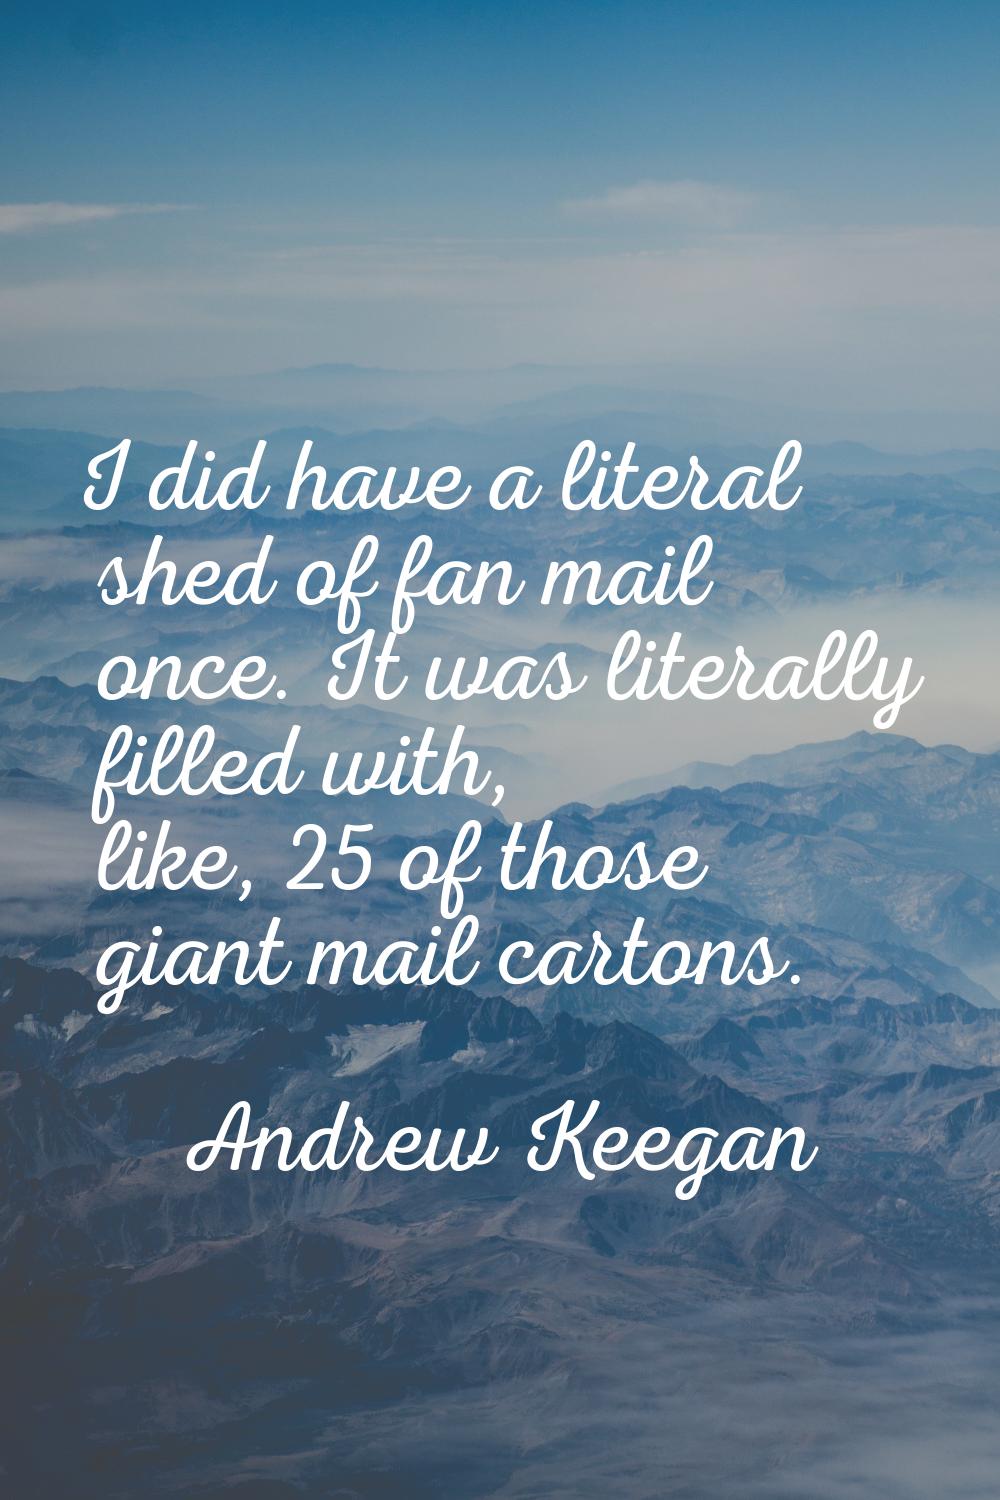 I did have a literal shed of fan mail once. It was literally filled with, like, 25 of those giant m